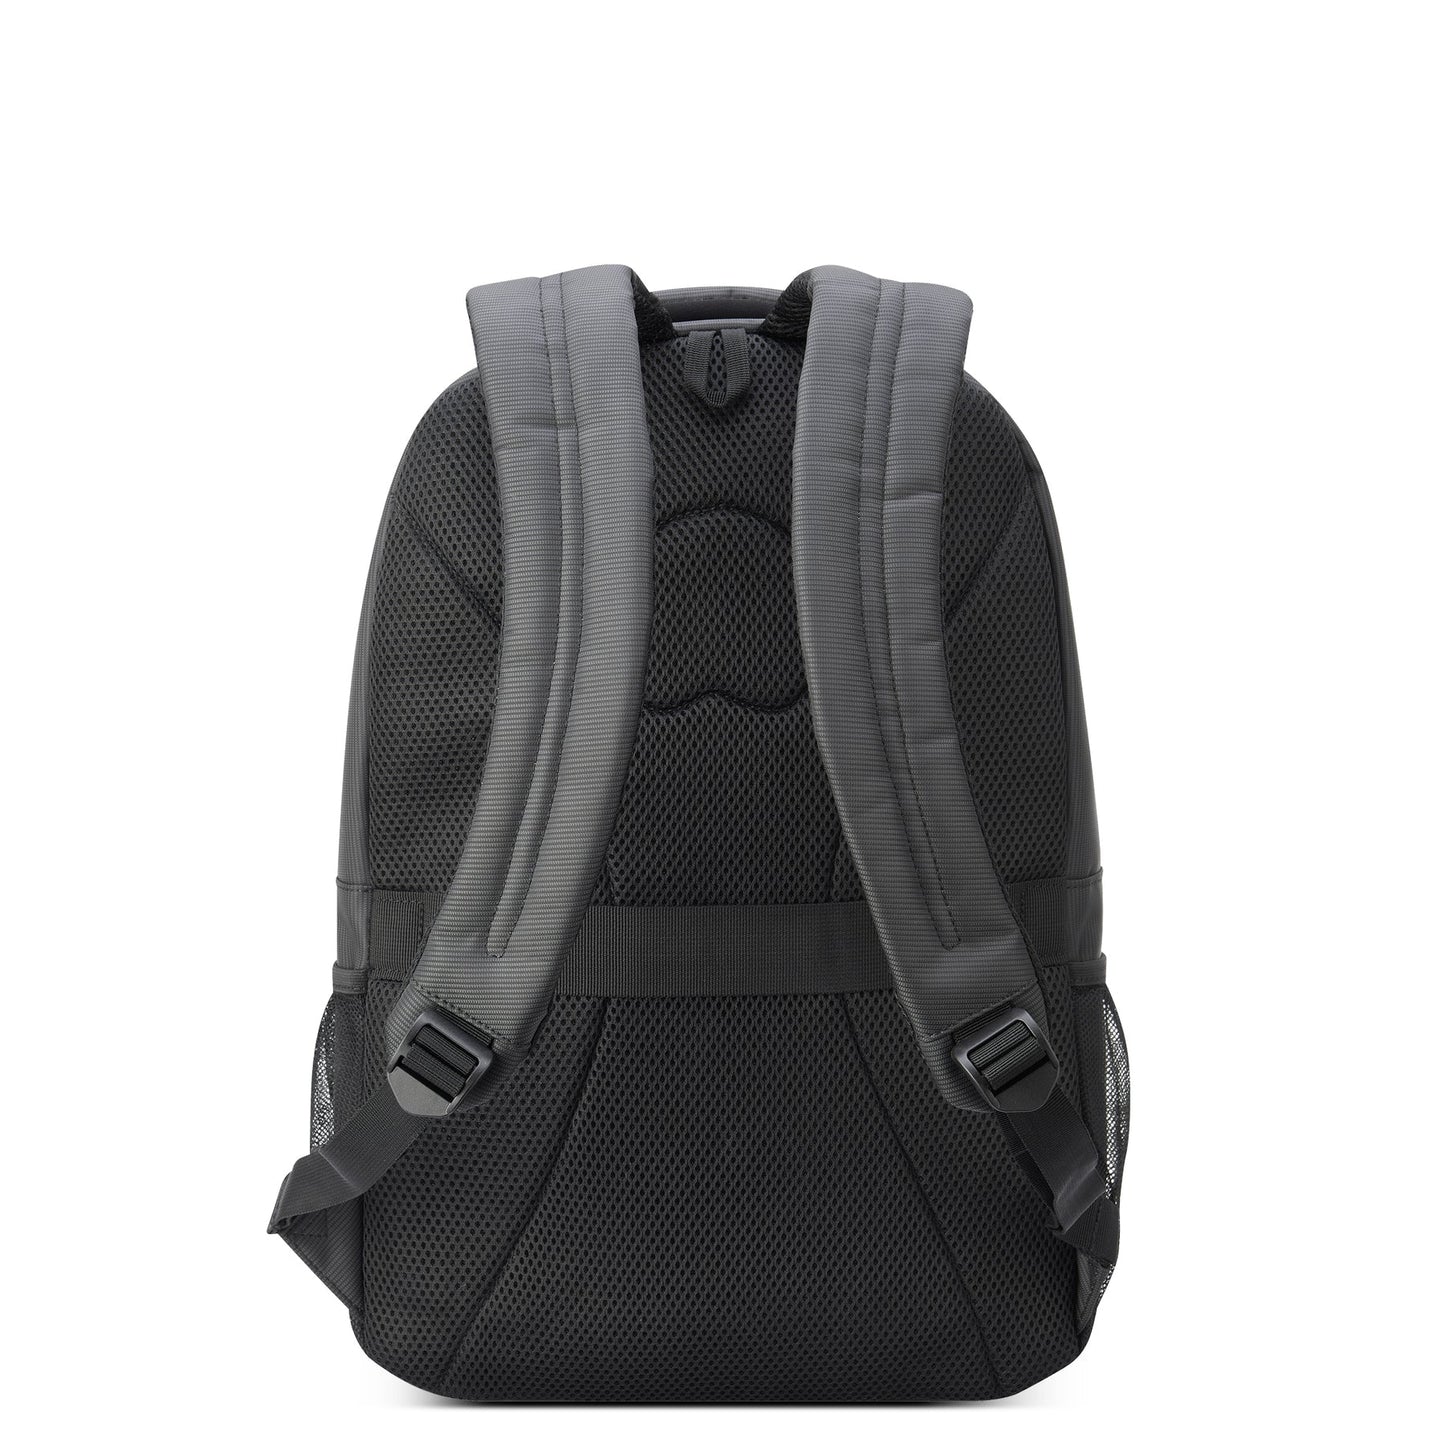 BAG - Backpack (PC Protection 15.6")